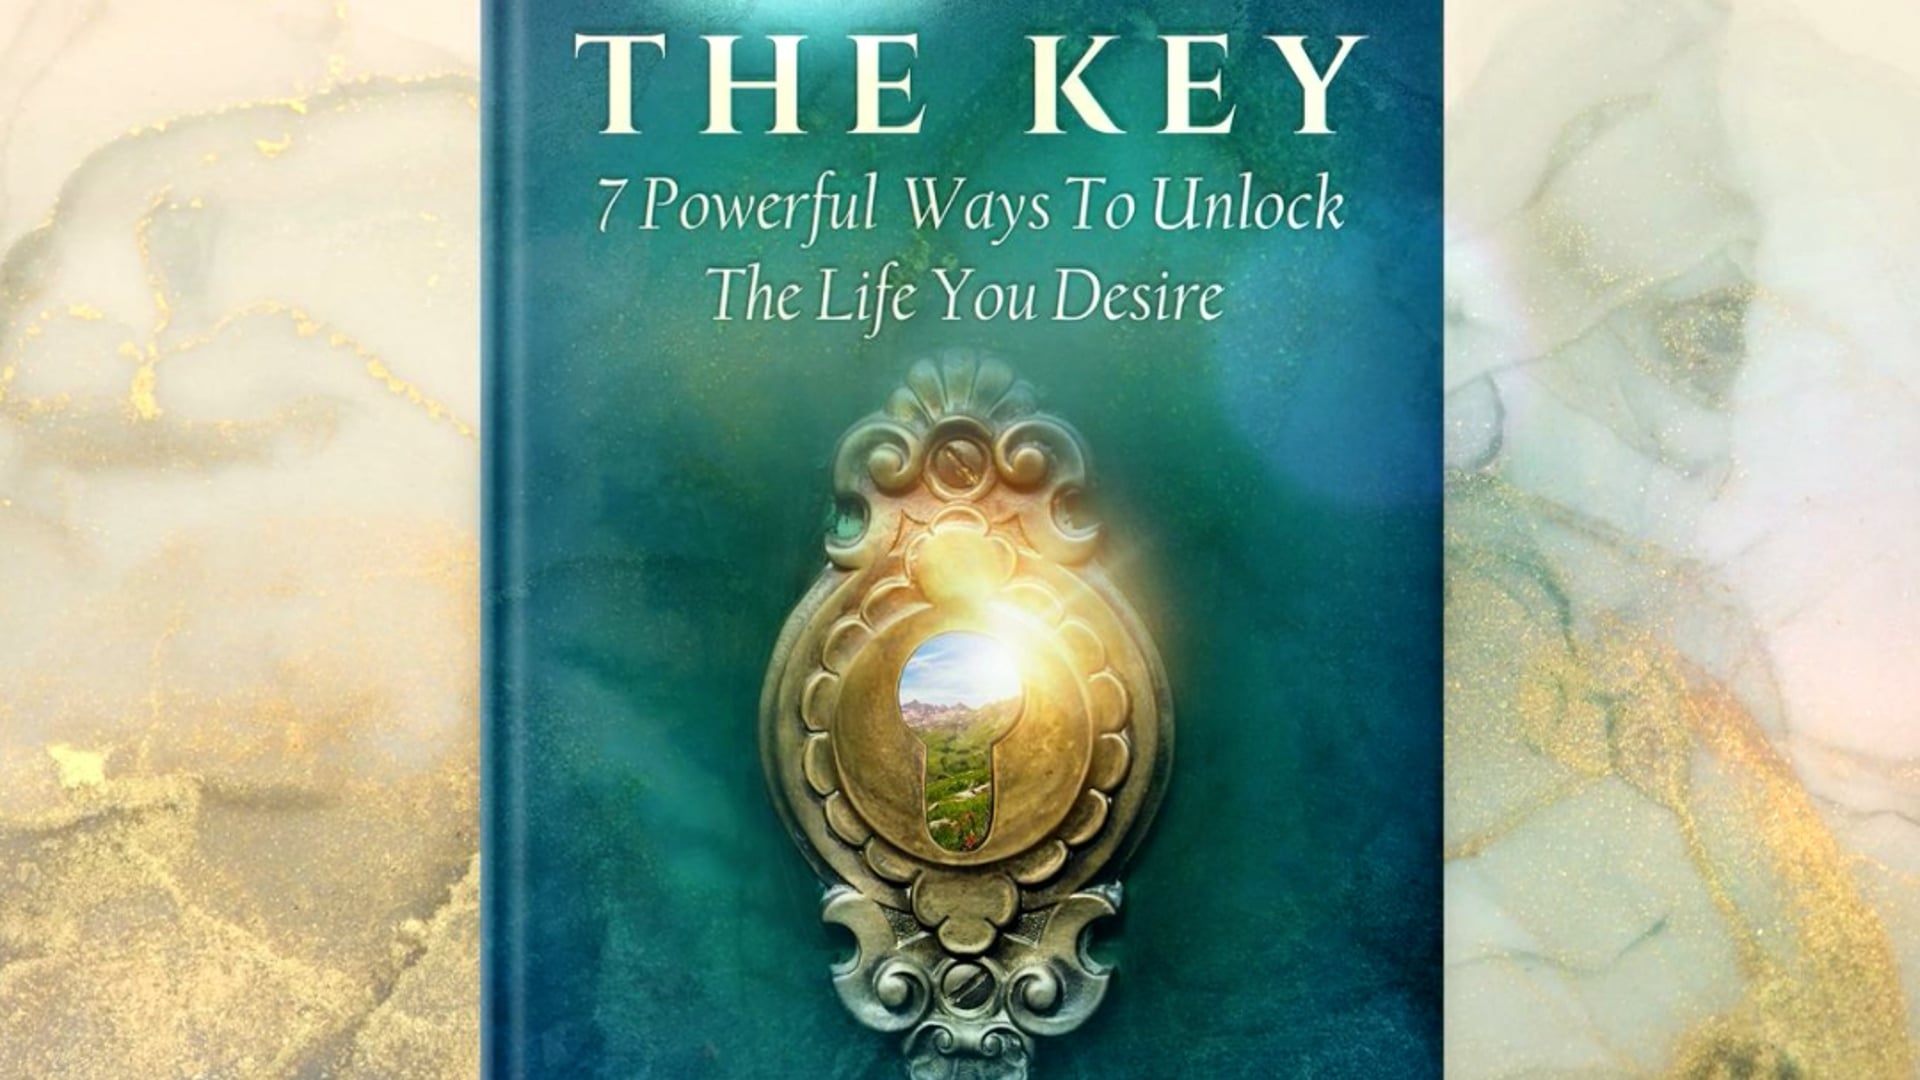 You are the Key